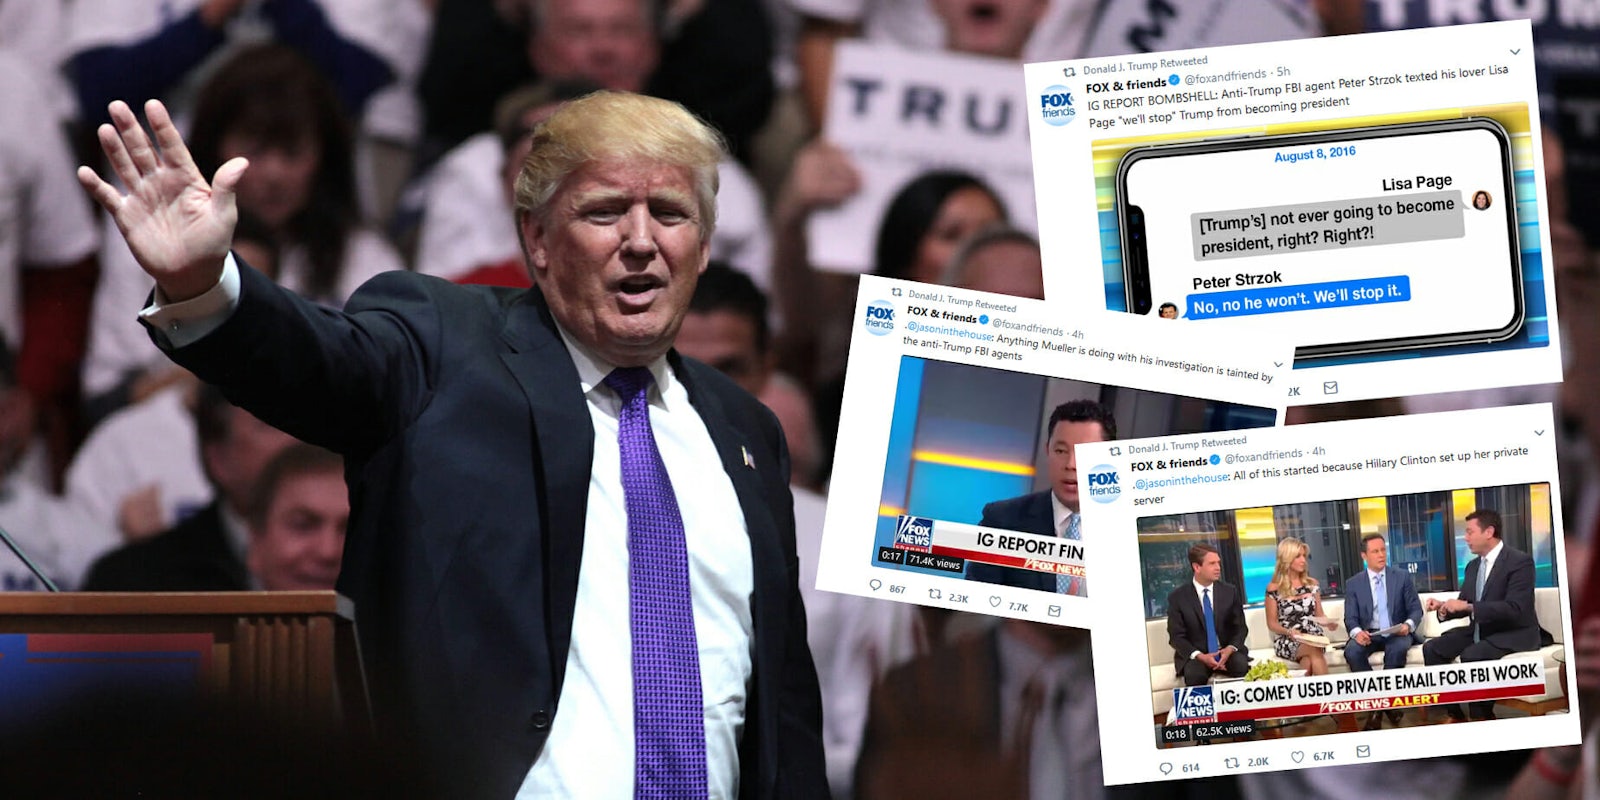 President Donald Trump used Twitter on Friday morning to comment on the release and findings of an Inspector General report about the FBI's role in the 2016 presidential election–but he seemed most jazzed about what Fox & Friends were talking about.